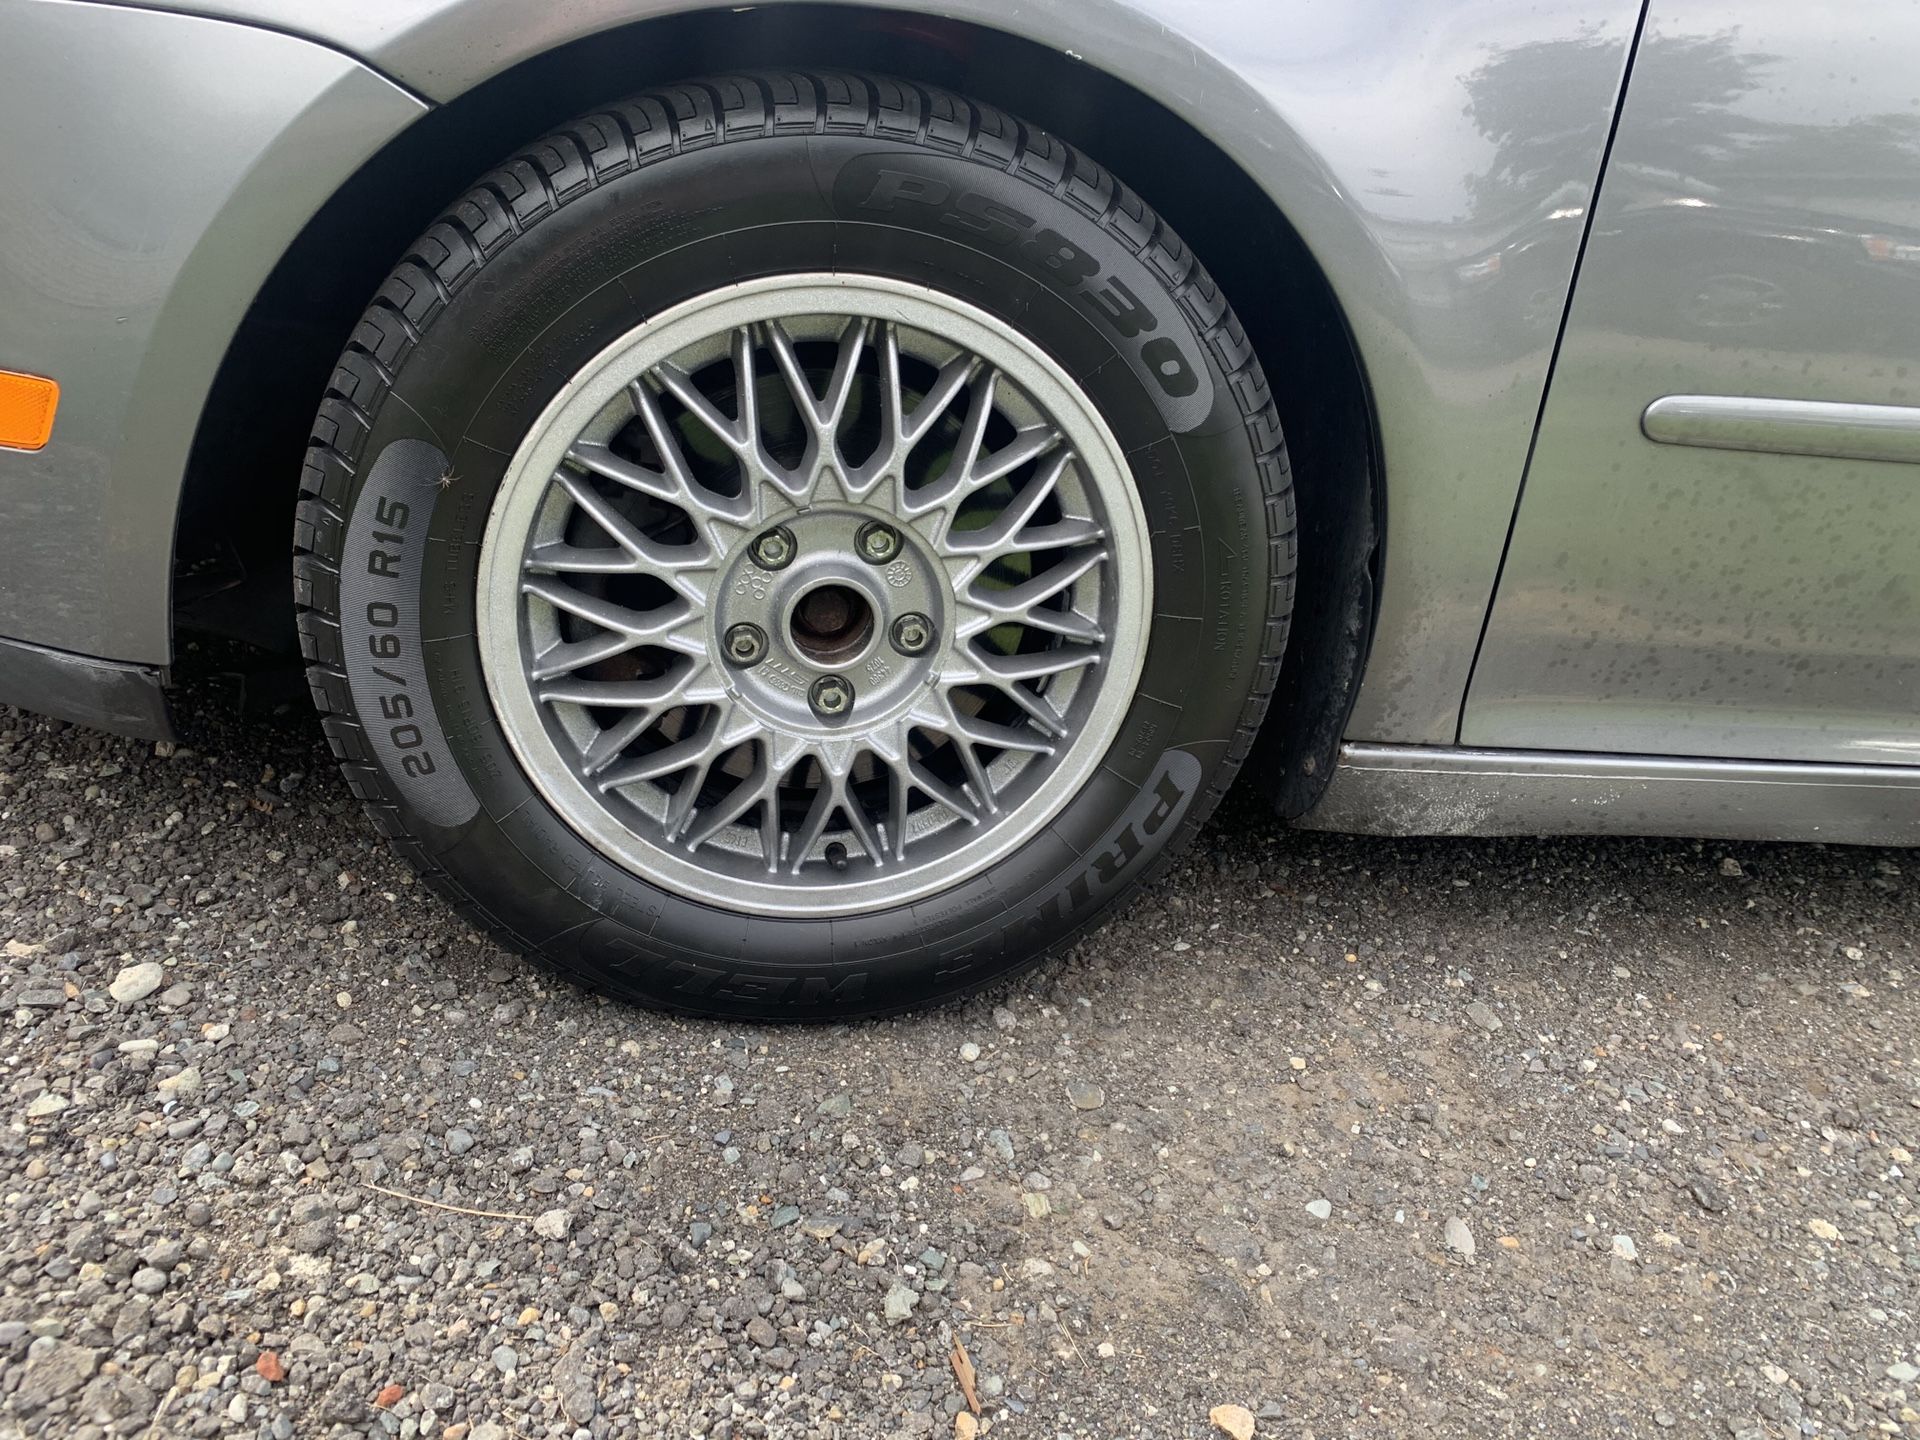 Audi rims 15s with 60 series tires brand new